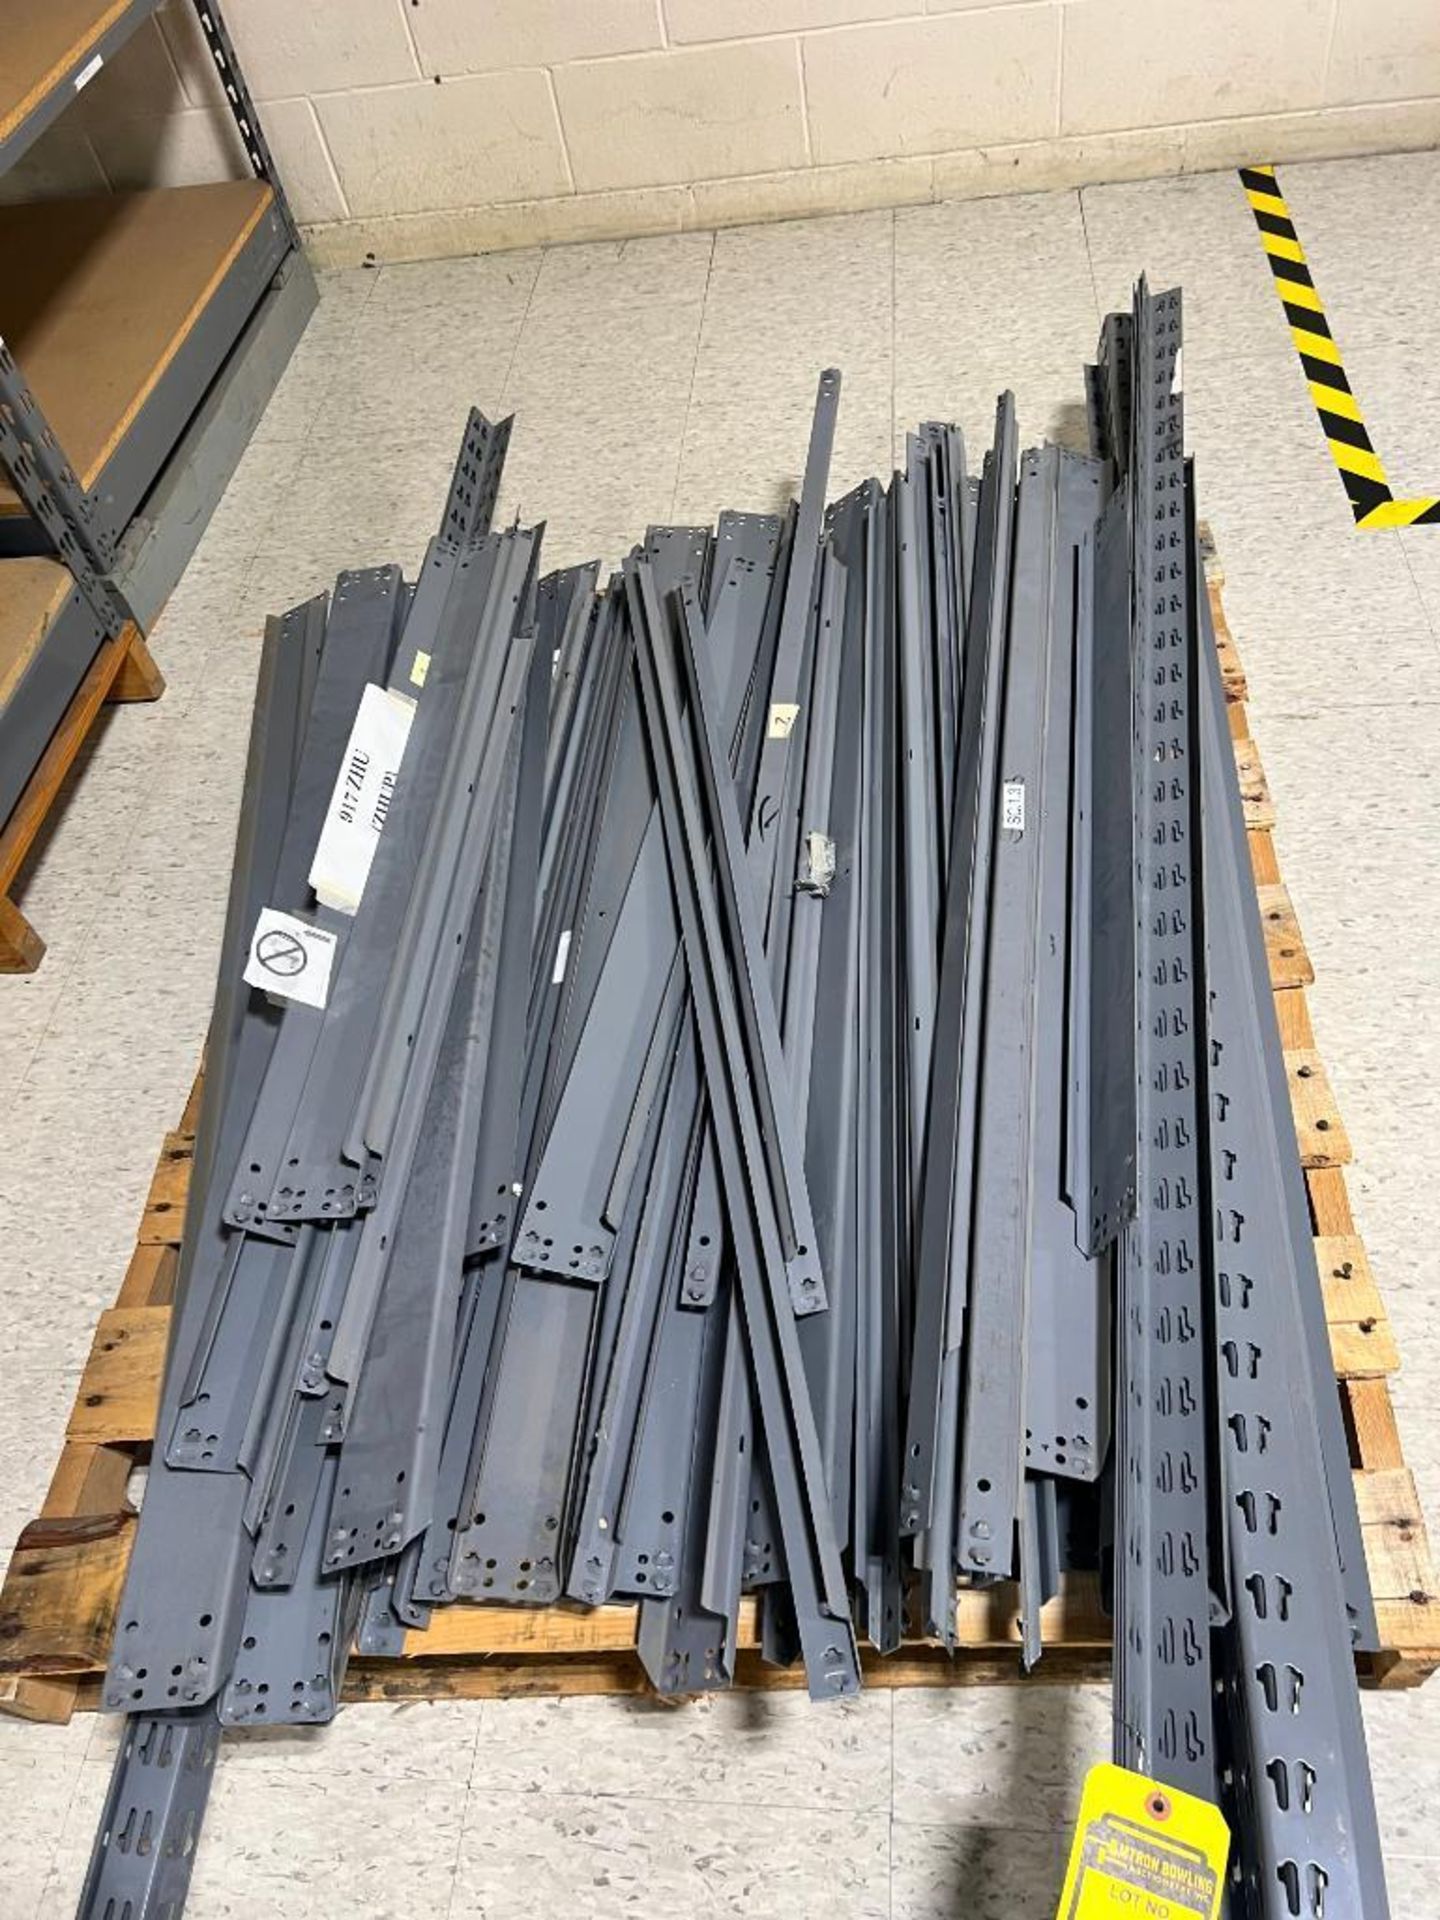 Skid of Republic Wedge Lock Assorted Shelving Components - Image 5 of 5